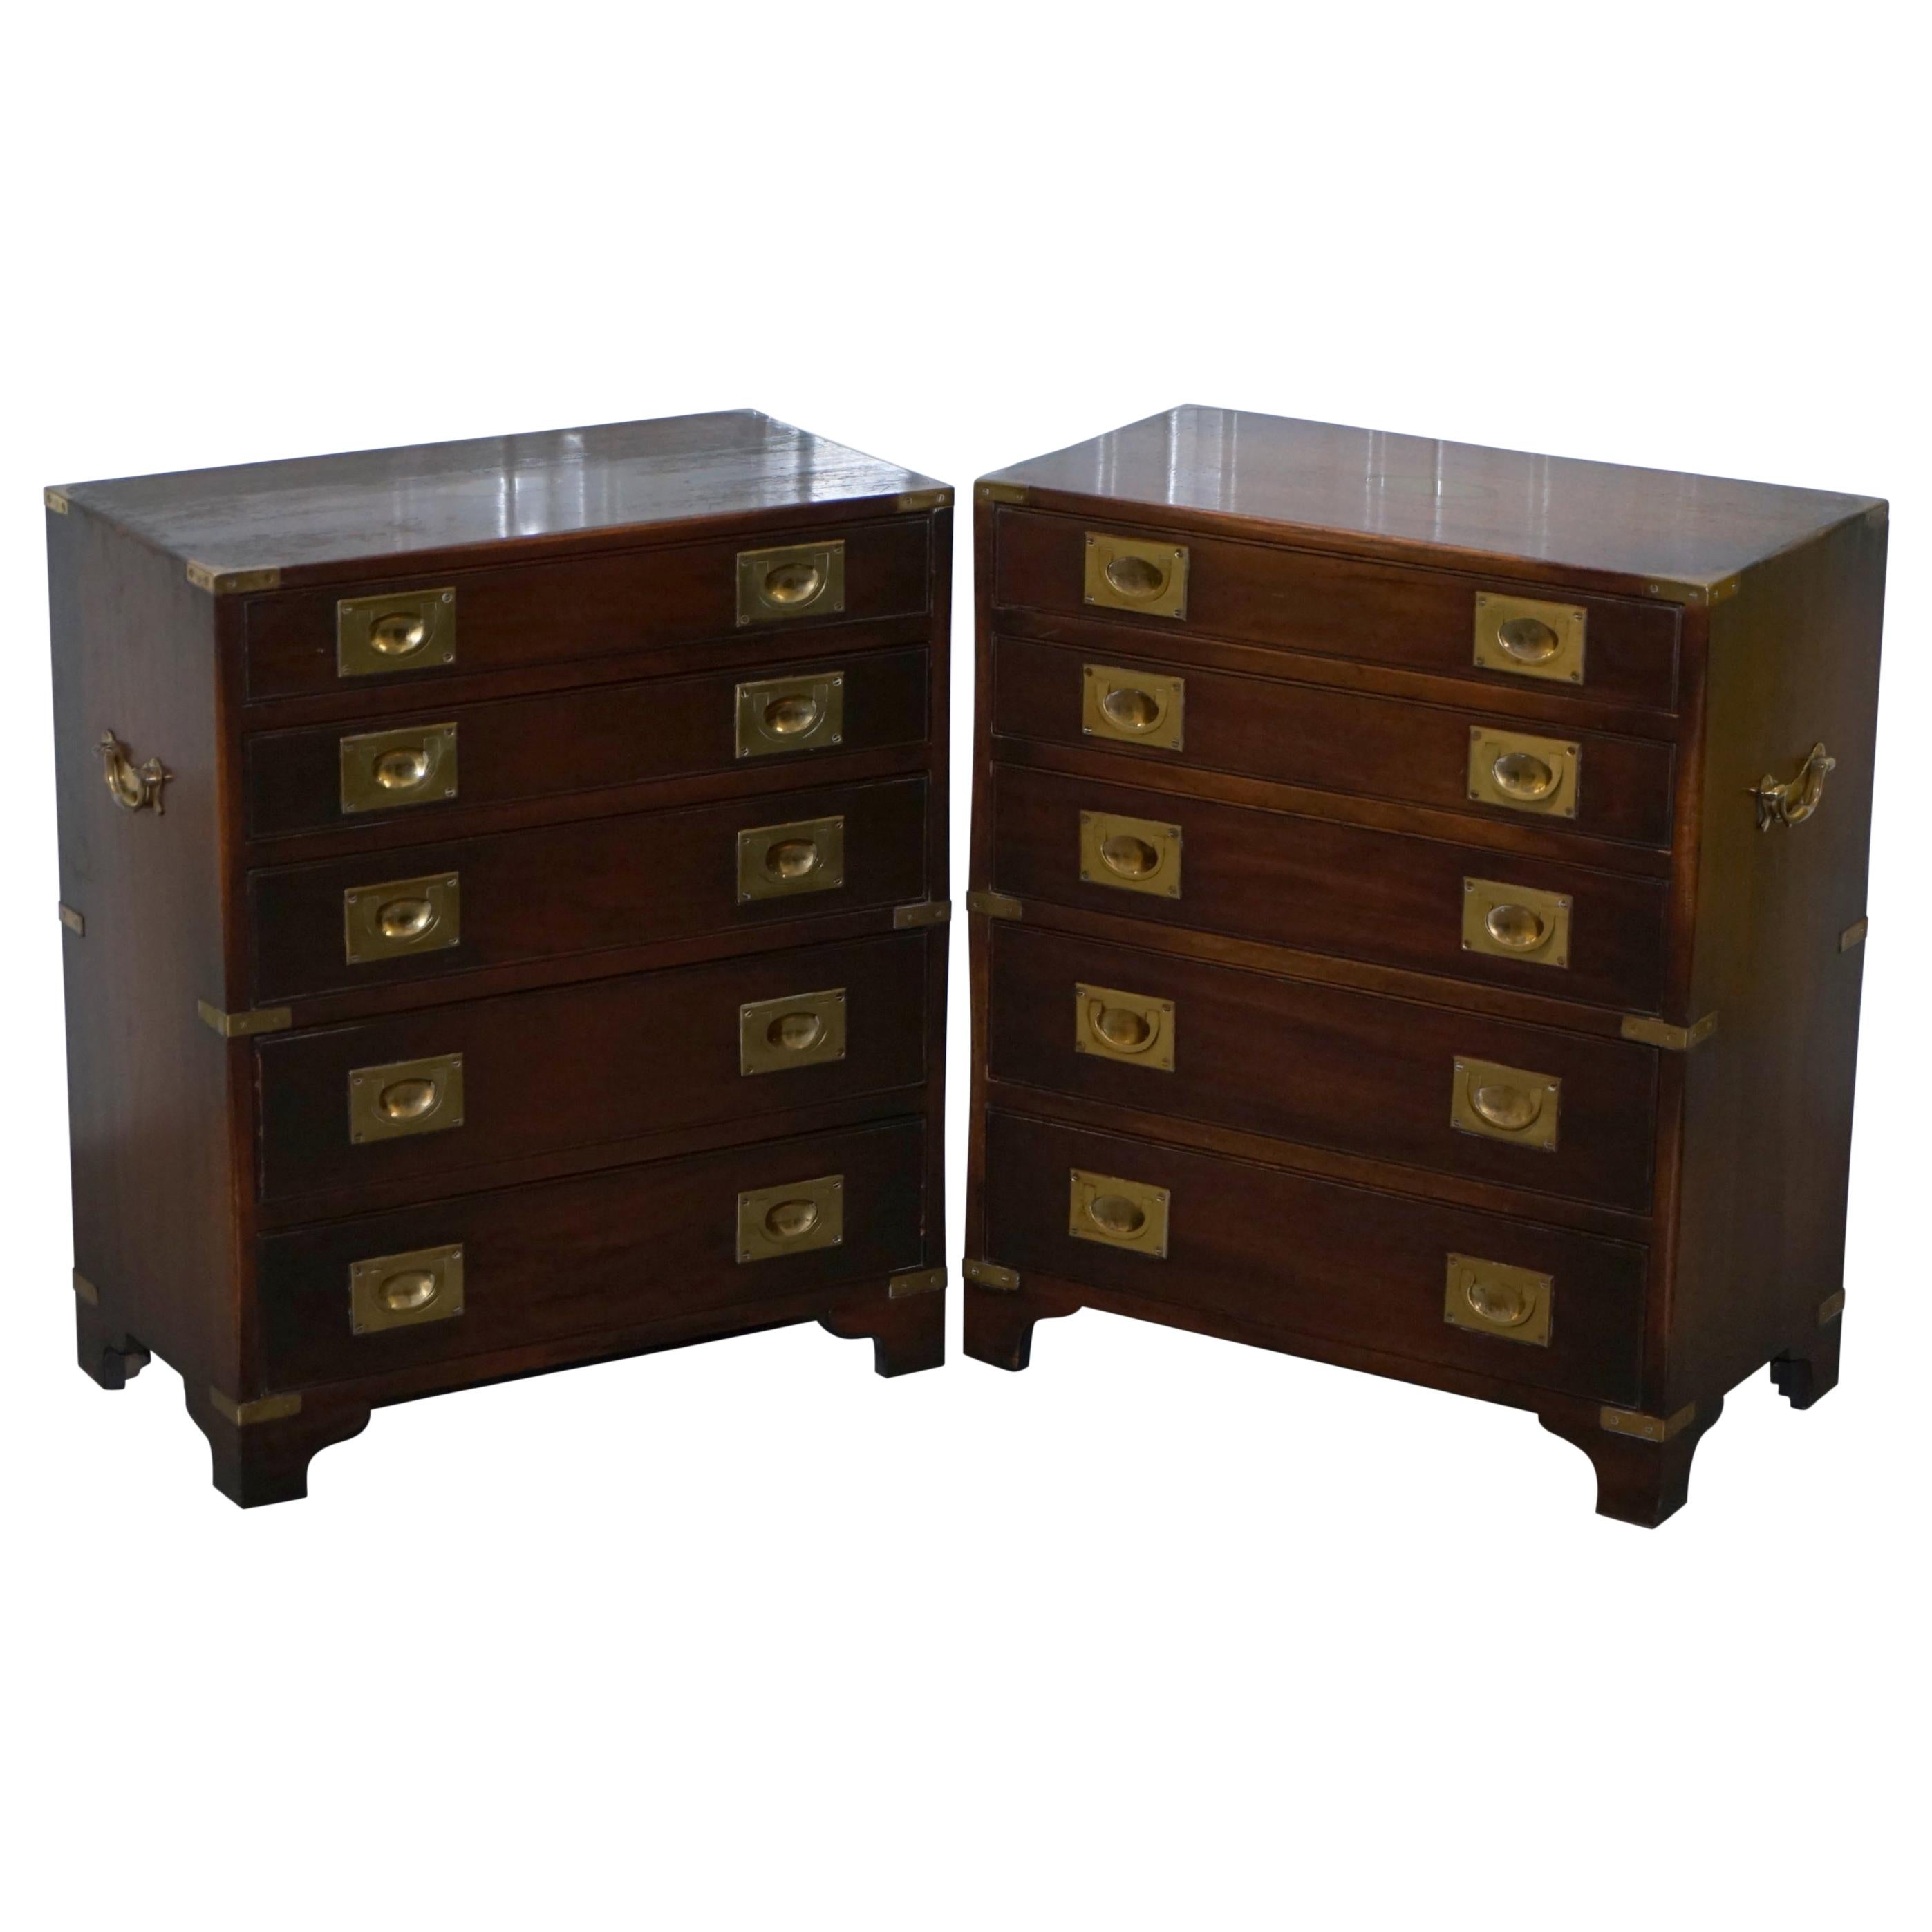 Pair of Mahogany Military Campaign Bevan Funnell Side Table Chest of Drawers